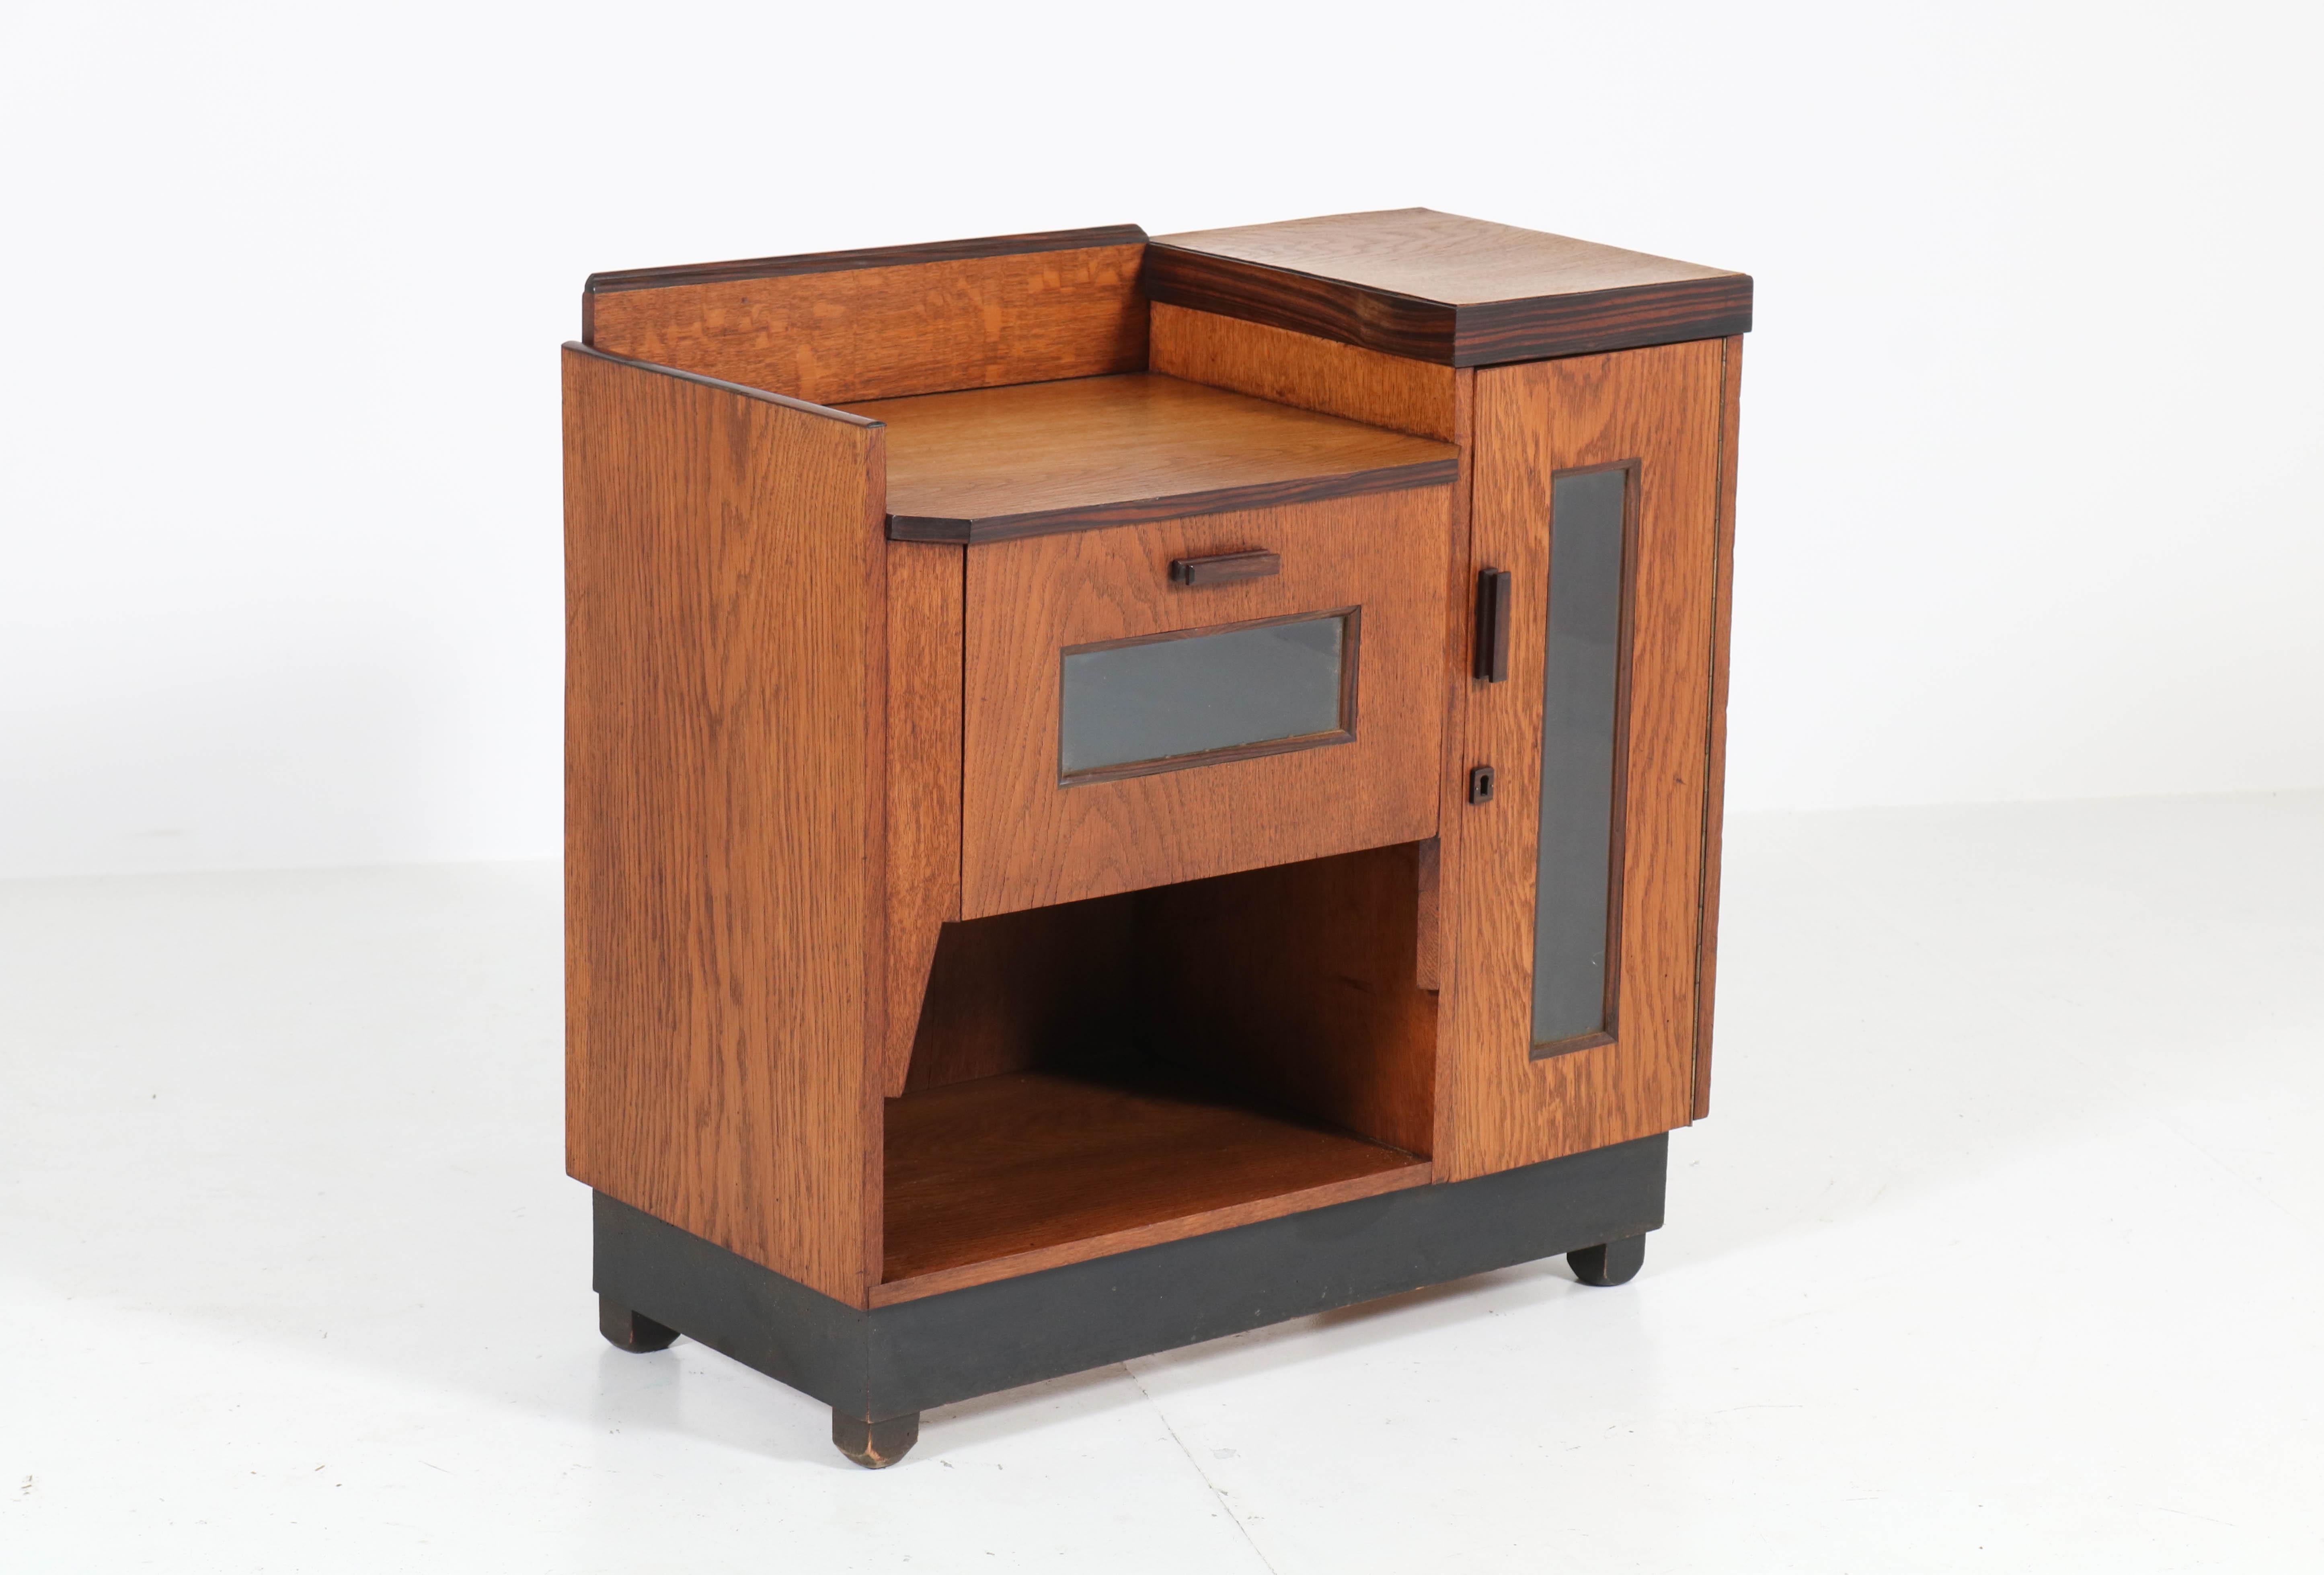 Wonderful and rare Art Deco Haagse School tea cabinet.
Design by P.E.L. Izeren for Genneper Molen.
Striking Dutch design from the 1920s.
Solid oak with oak veneer and solid ebony Macassar handles and lining.
In very good original condition with